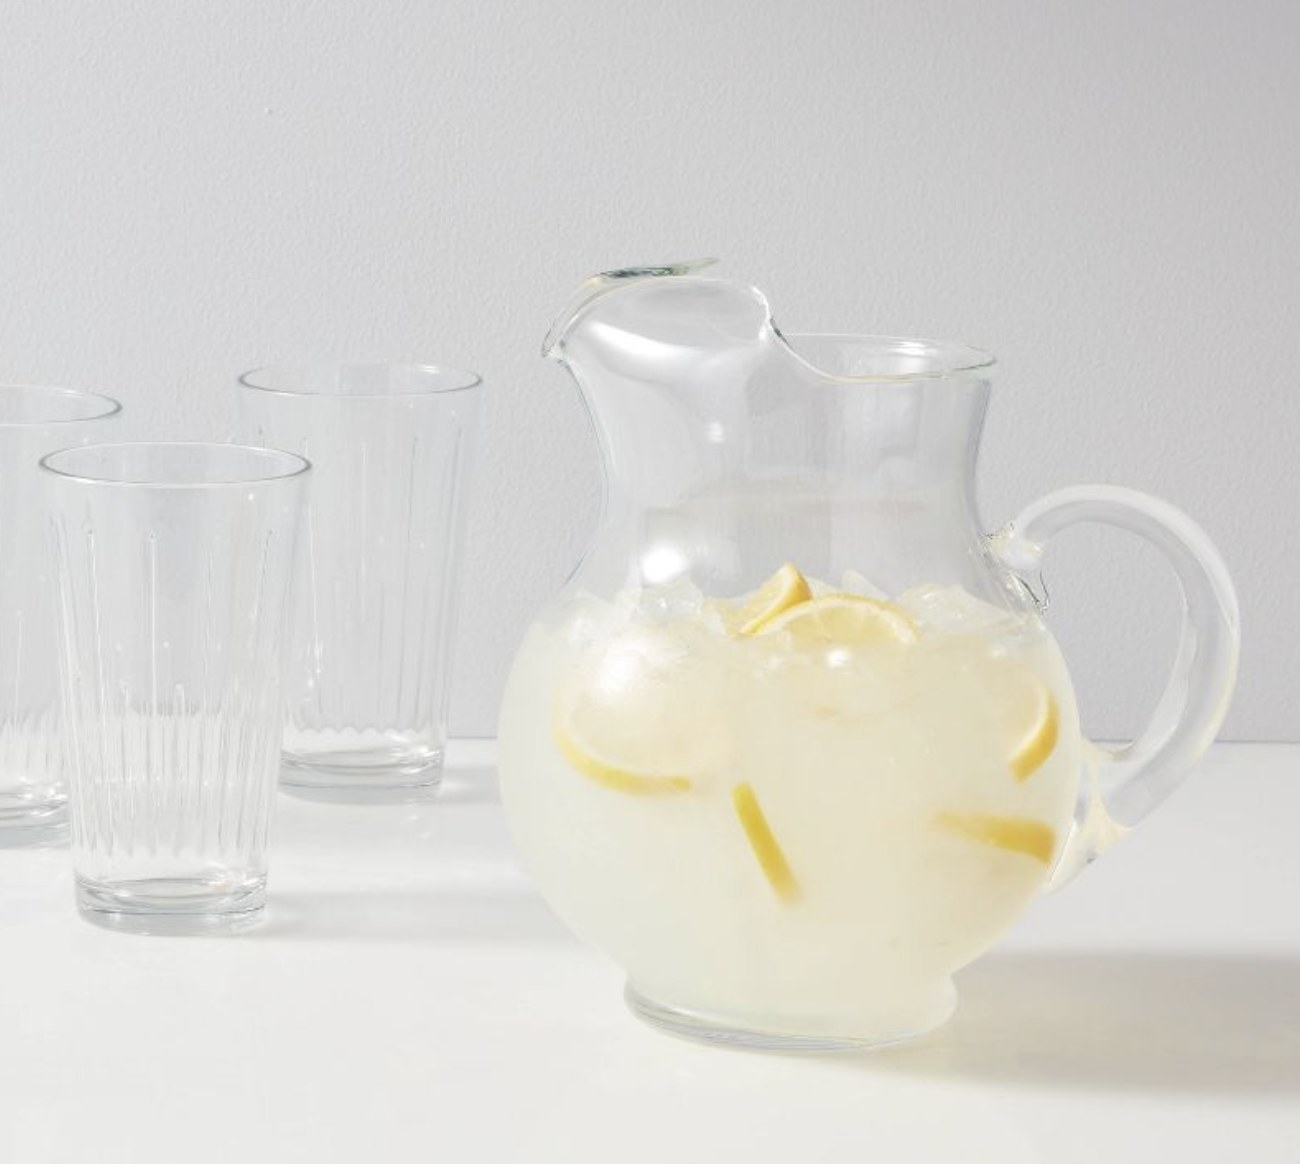 A glass pitcher filled with lemonade